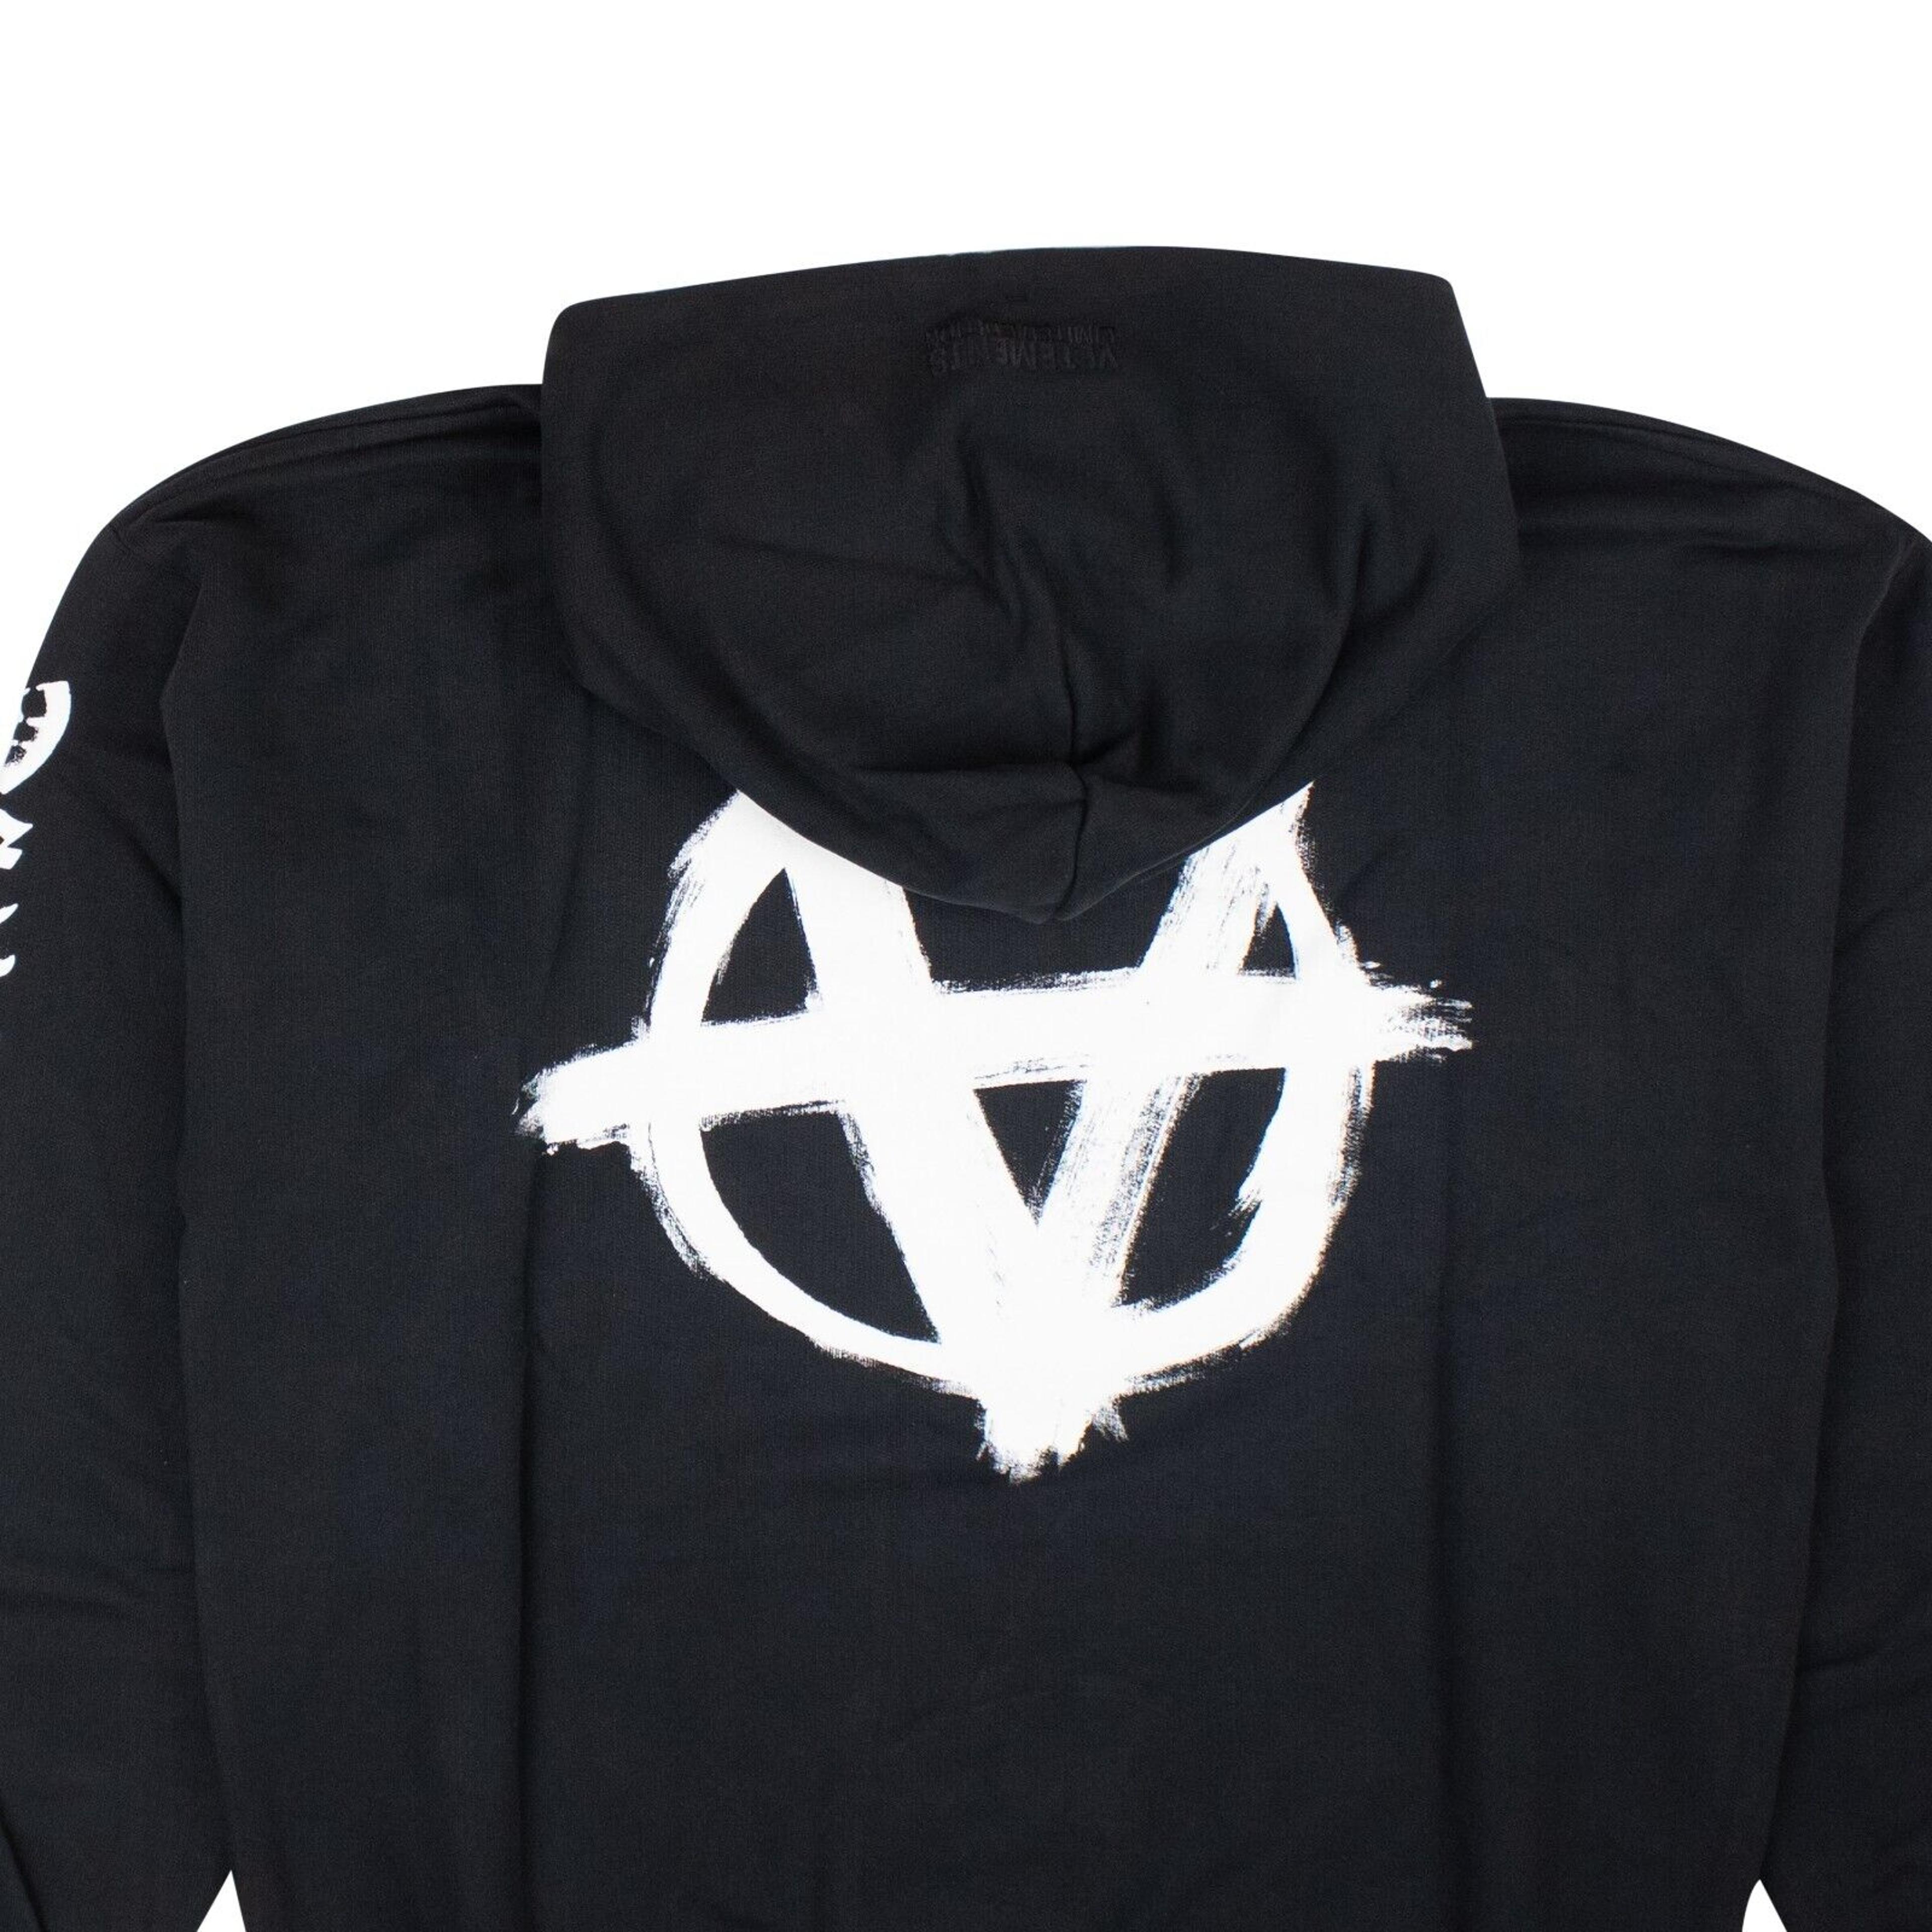 Alternate View 1 of Black Double Anarchy Popover Hoodie